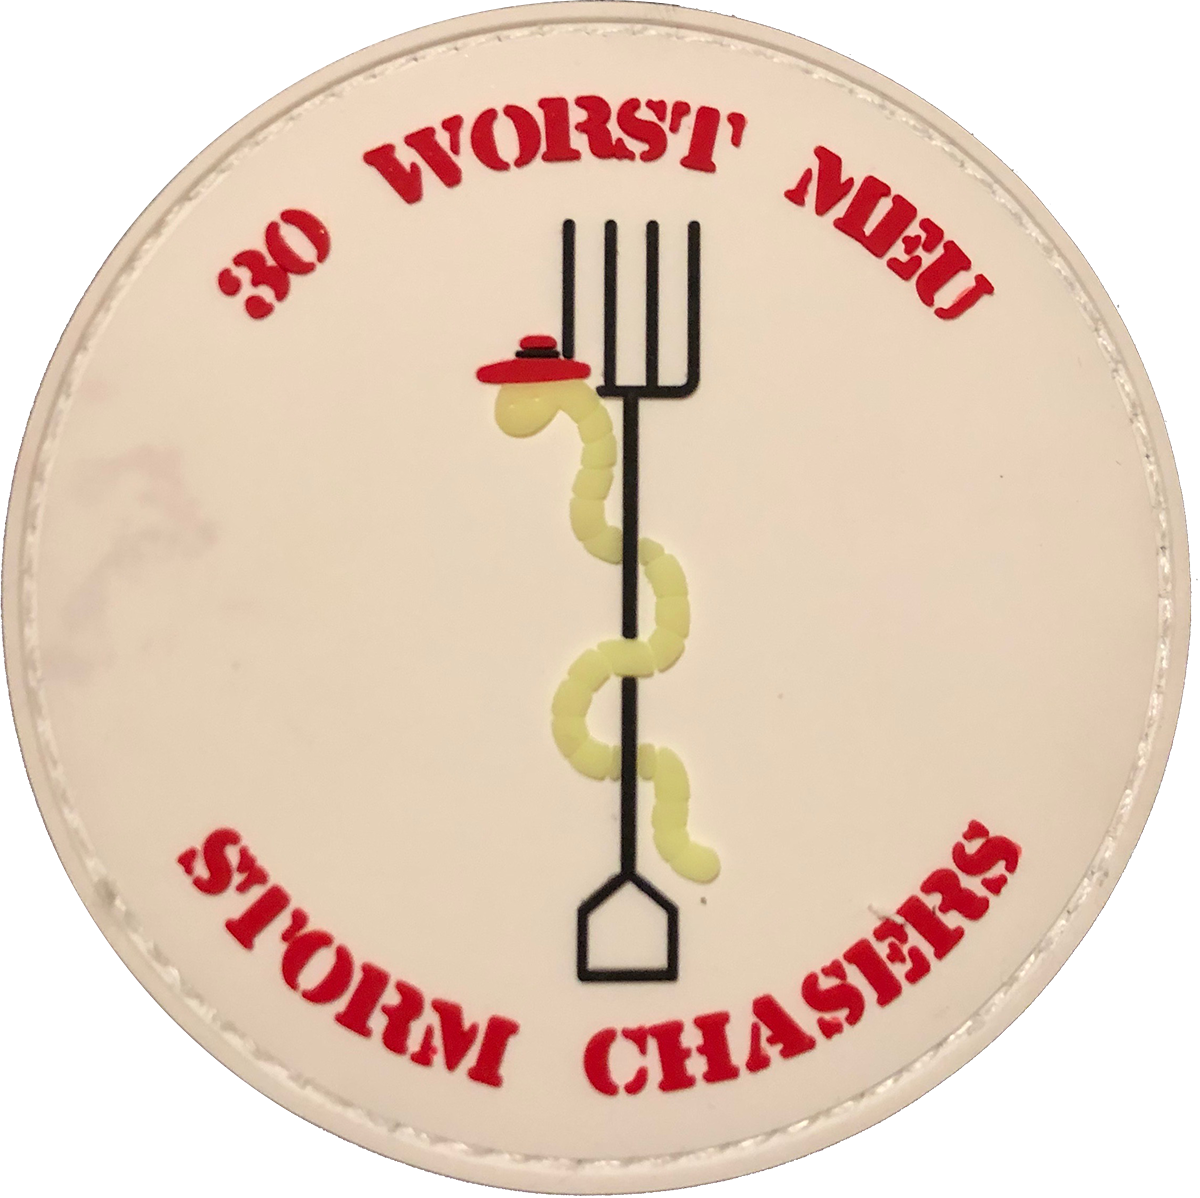 30th Worst MEU Storm Chasers PVC USMC Patch - with HOOK Fastener